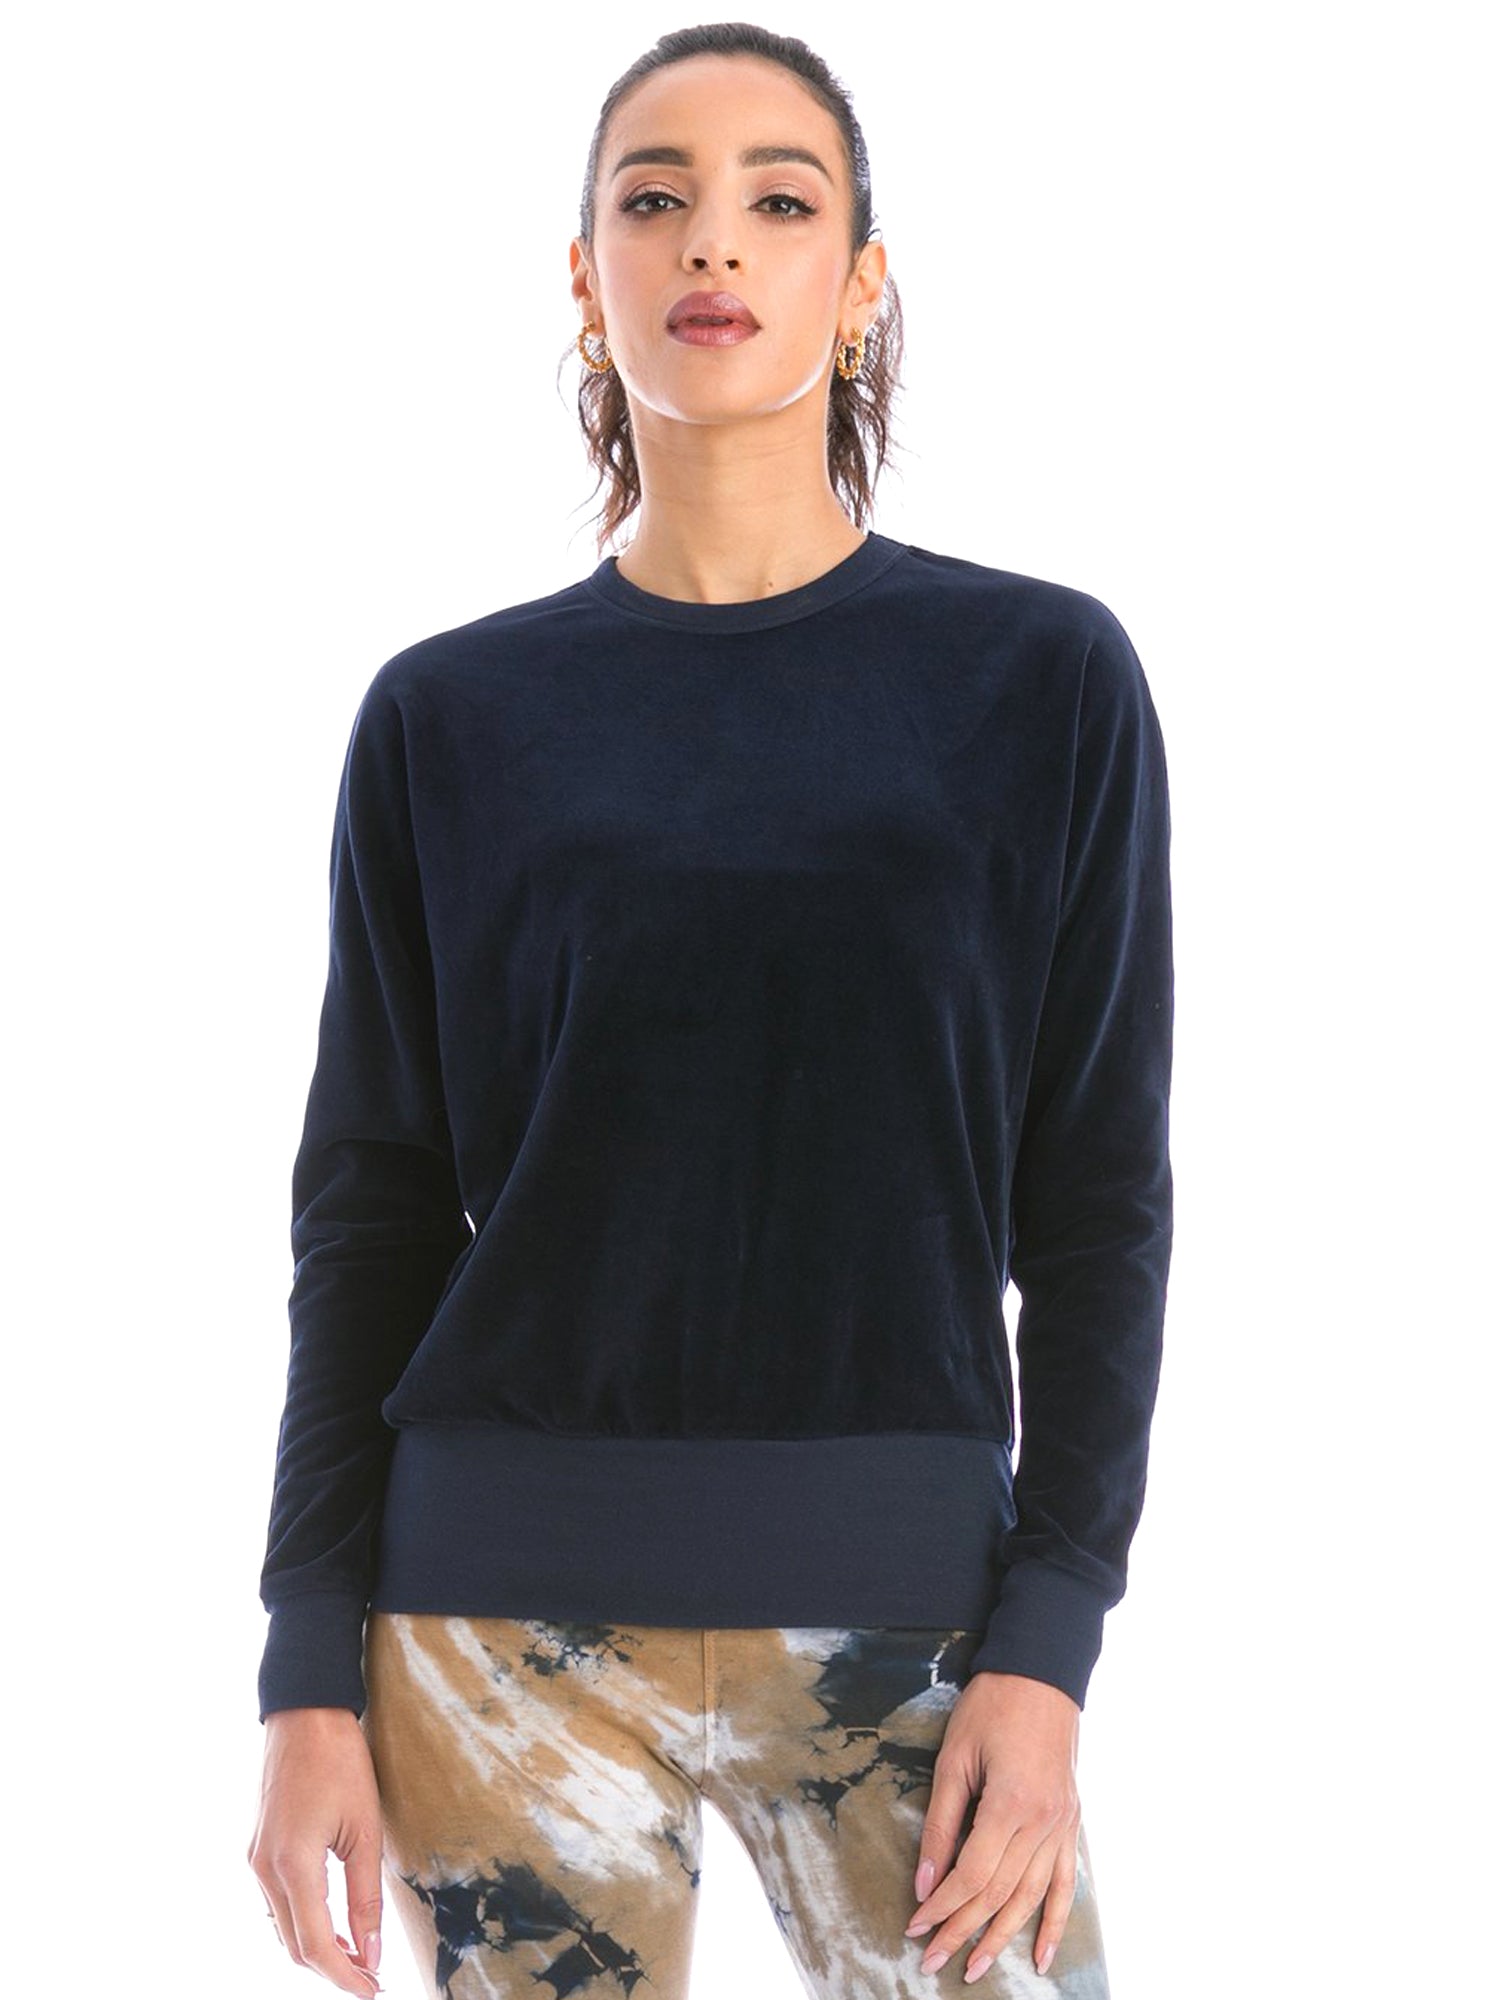 Hard Tail Velour Long Sleeve Banded Pullover Top (V-199) - Tops